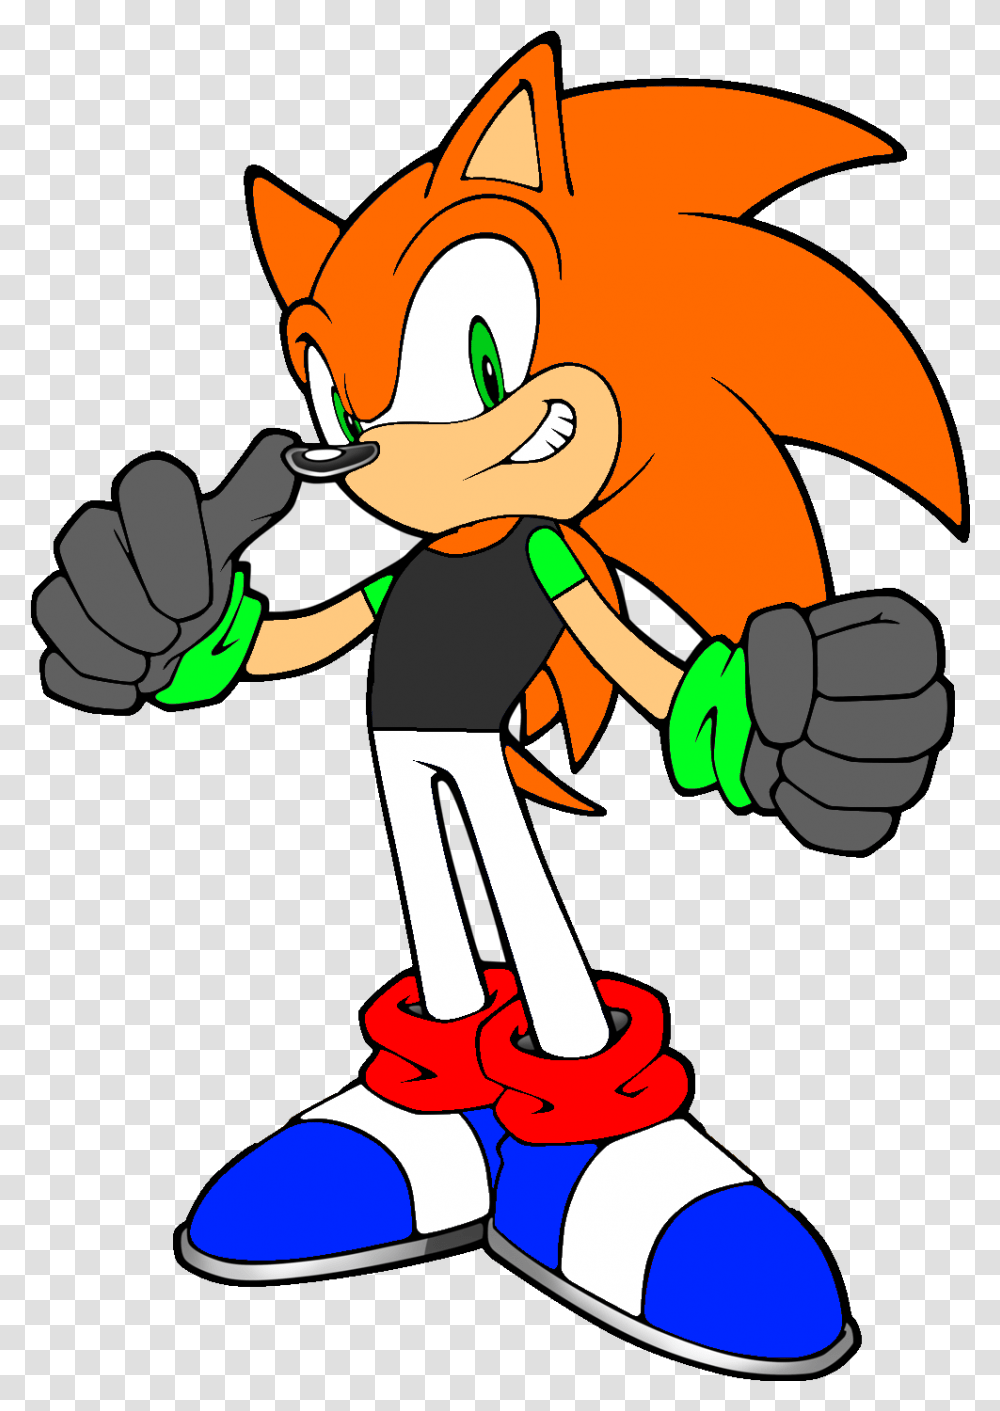 Download Super Sonic The Hedgehog Sonic The Hedgehog Sonic The Hedgehog Orange Friend, Hand, Fist Transparent Png